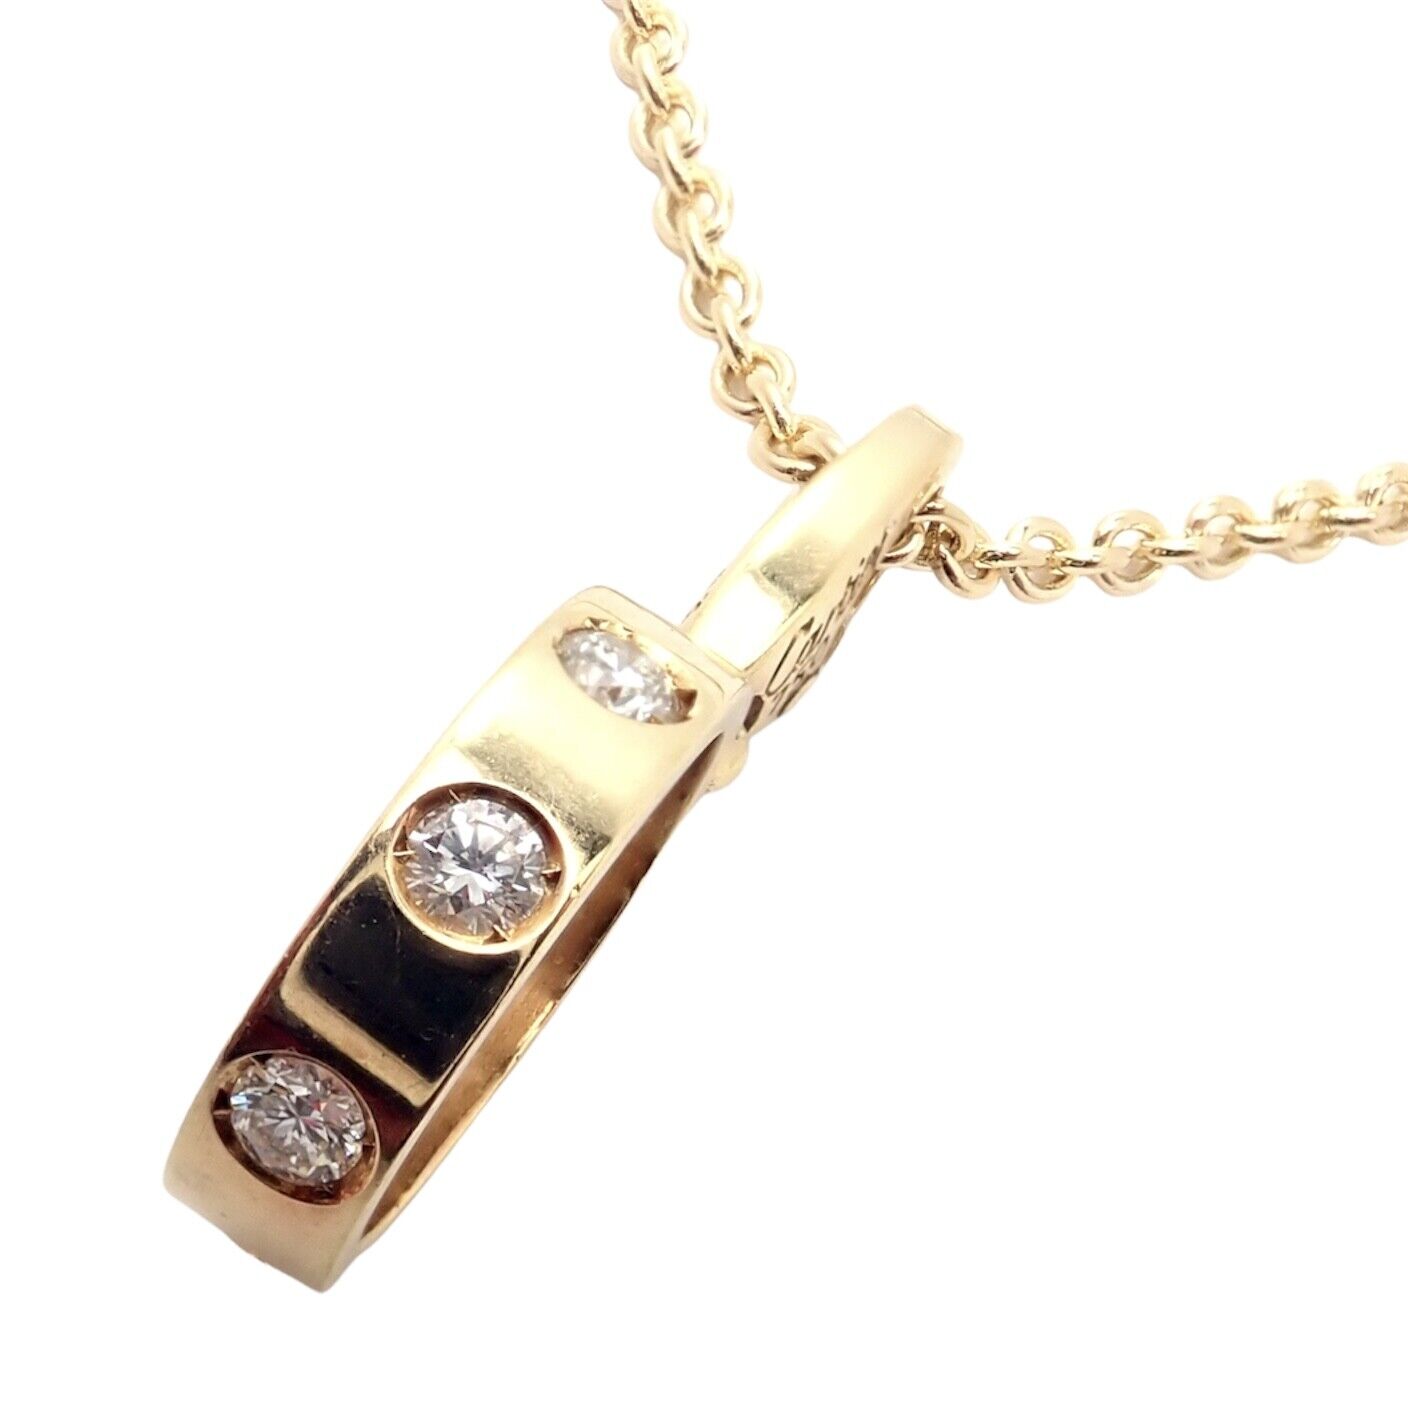 Cartier Jewelry & Watches:Fine Jewelry:Necklaces & Pendants Authentic! Cartier 18k Yellow Gold 7 Diamond LOVE Pendant Necklace